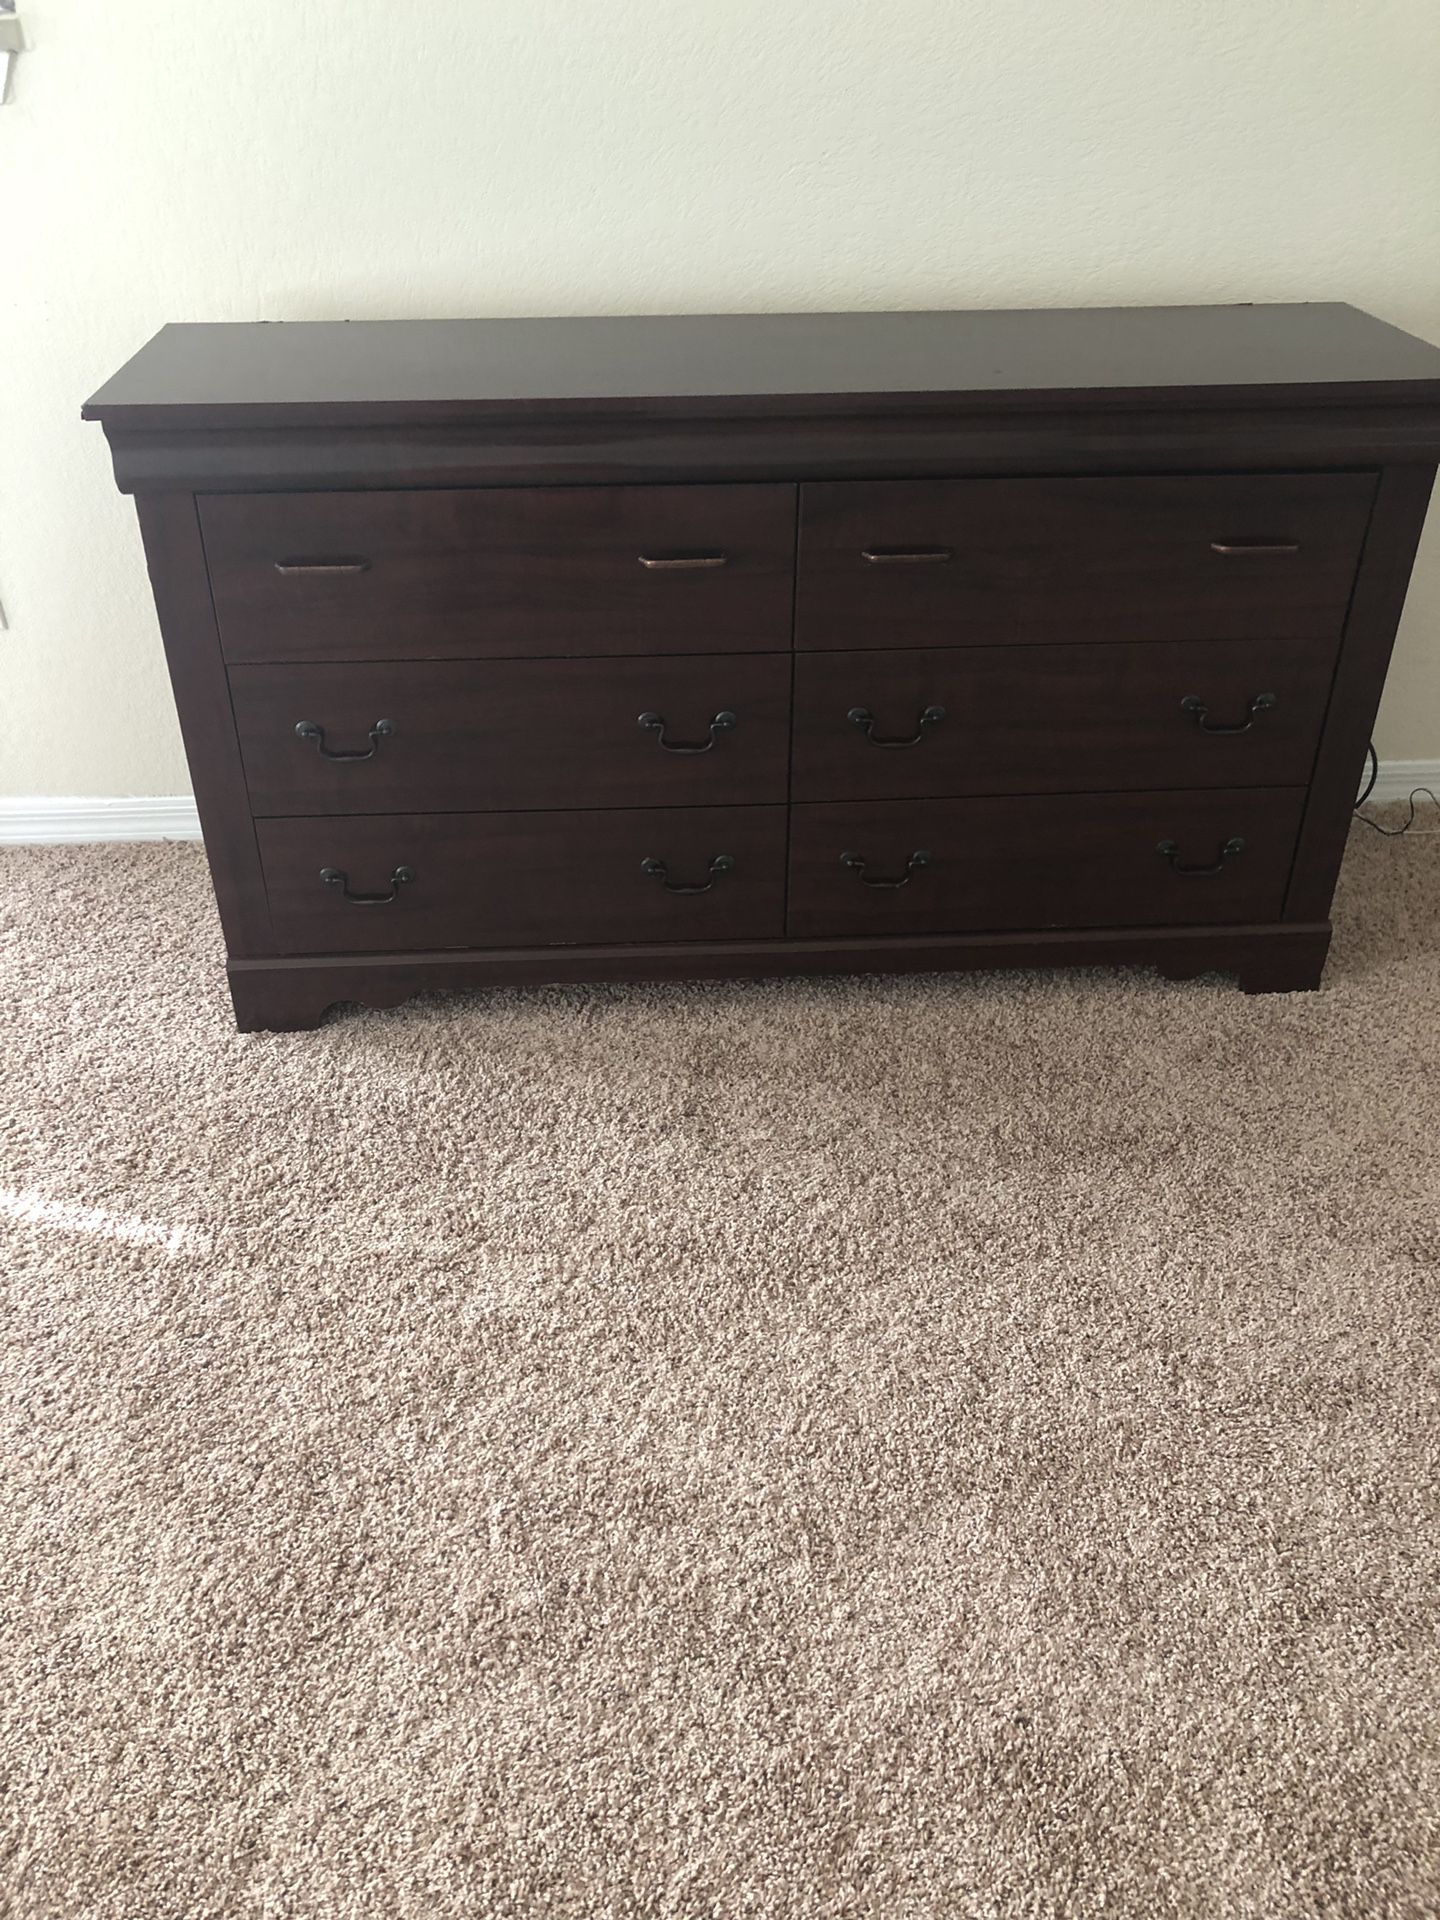 Nice long dresser/TV stand with 6 drawers in good condition, all drawers working well. L60"*W16"*H32.5"